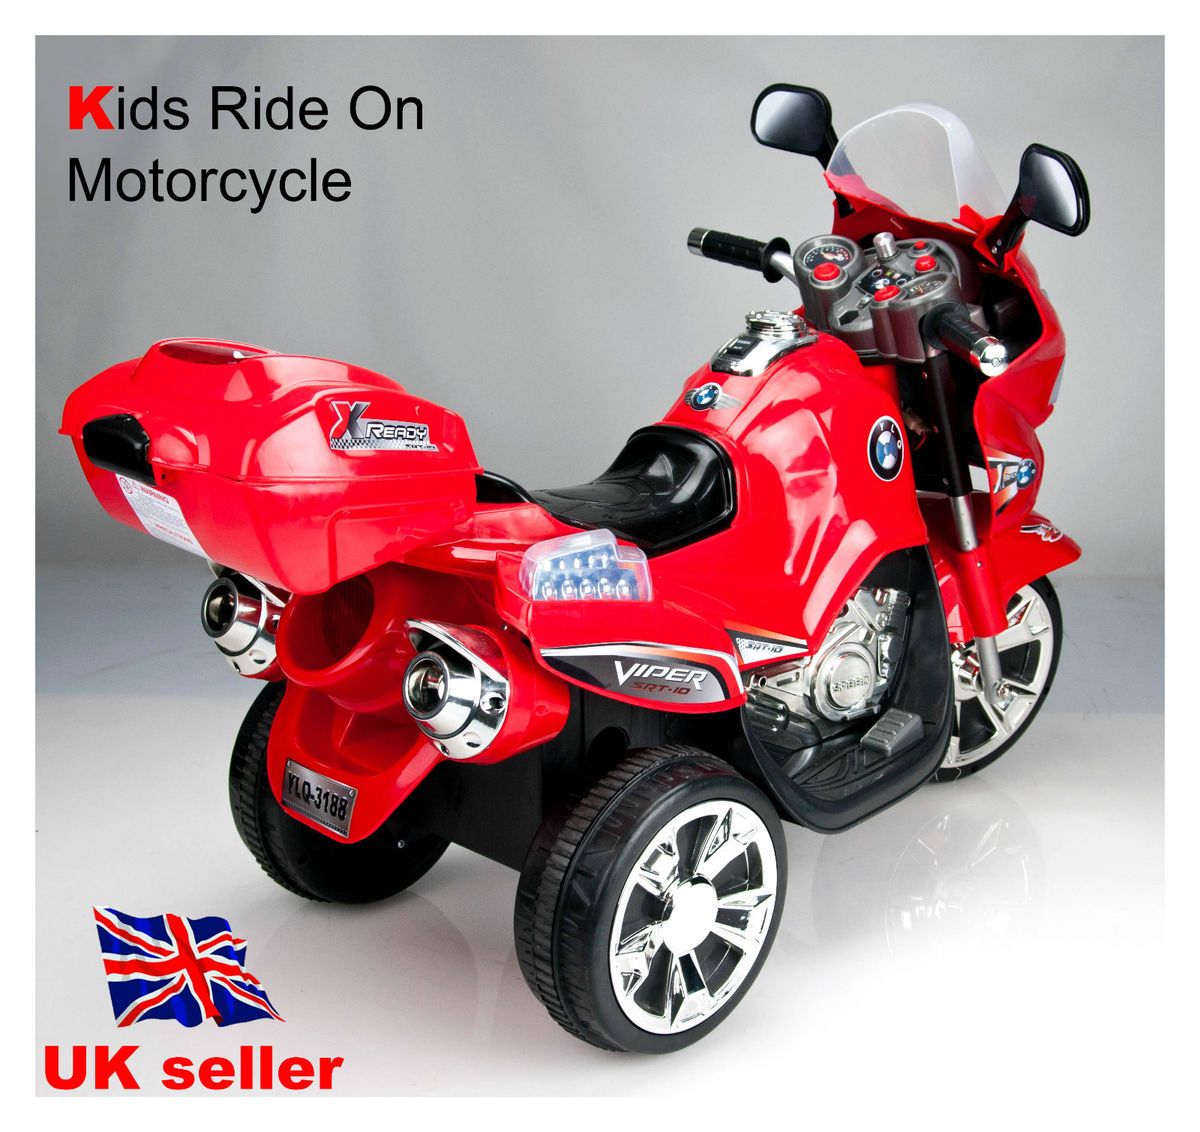 Kids Ride on 3 Wheels Motorcycle Bike 6V Electric Battery Powered Toy